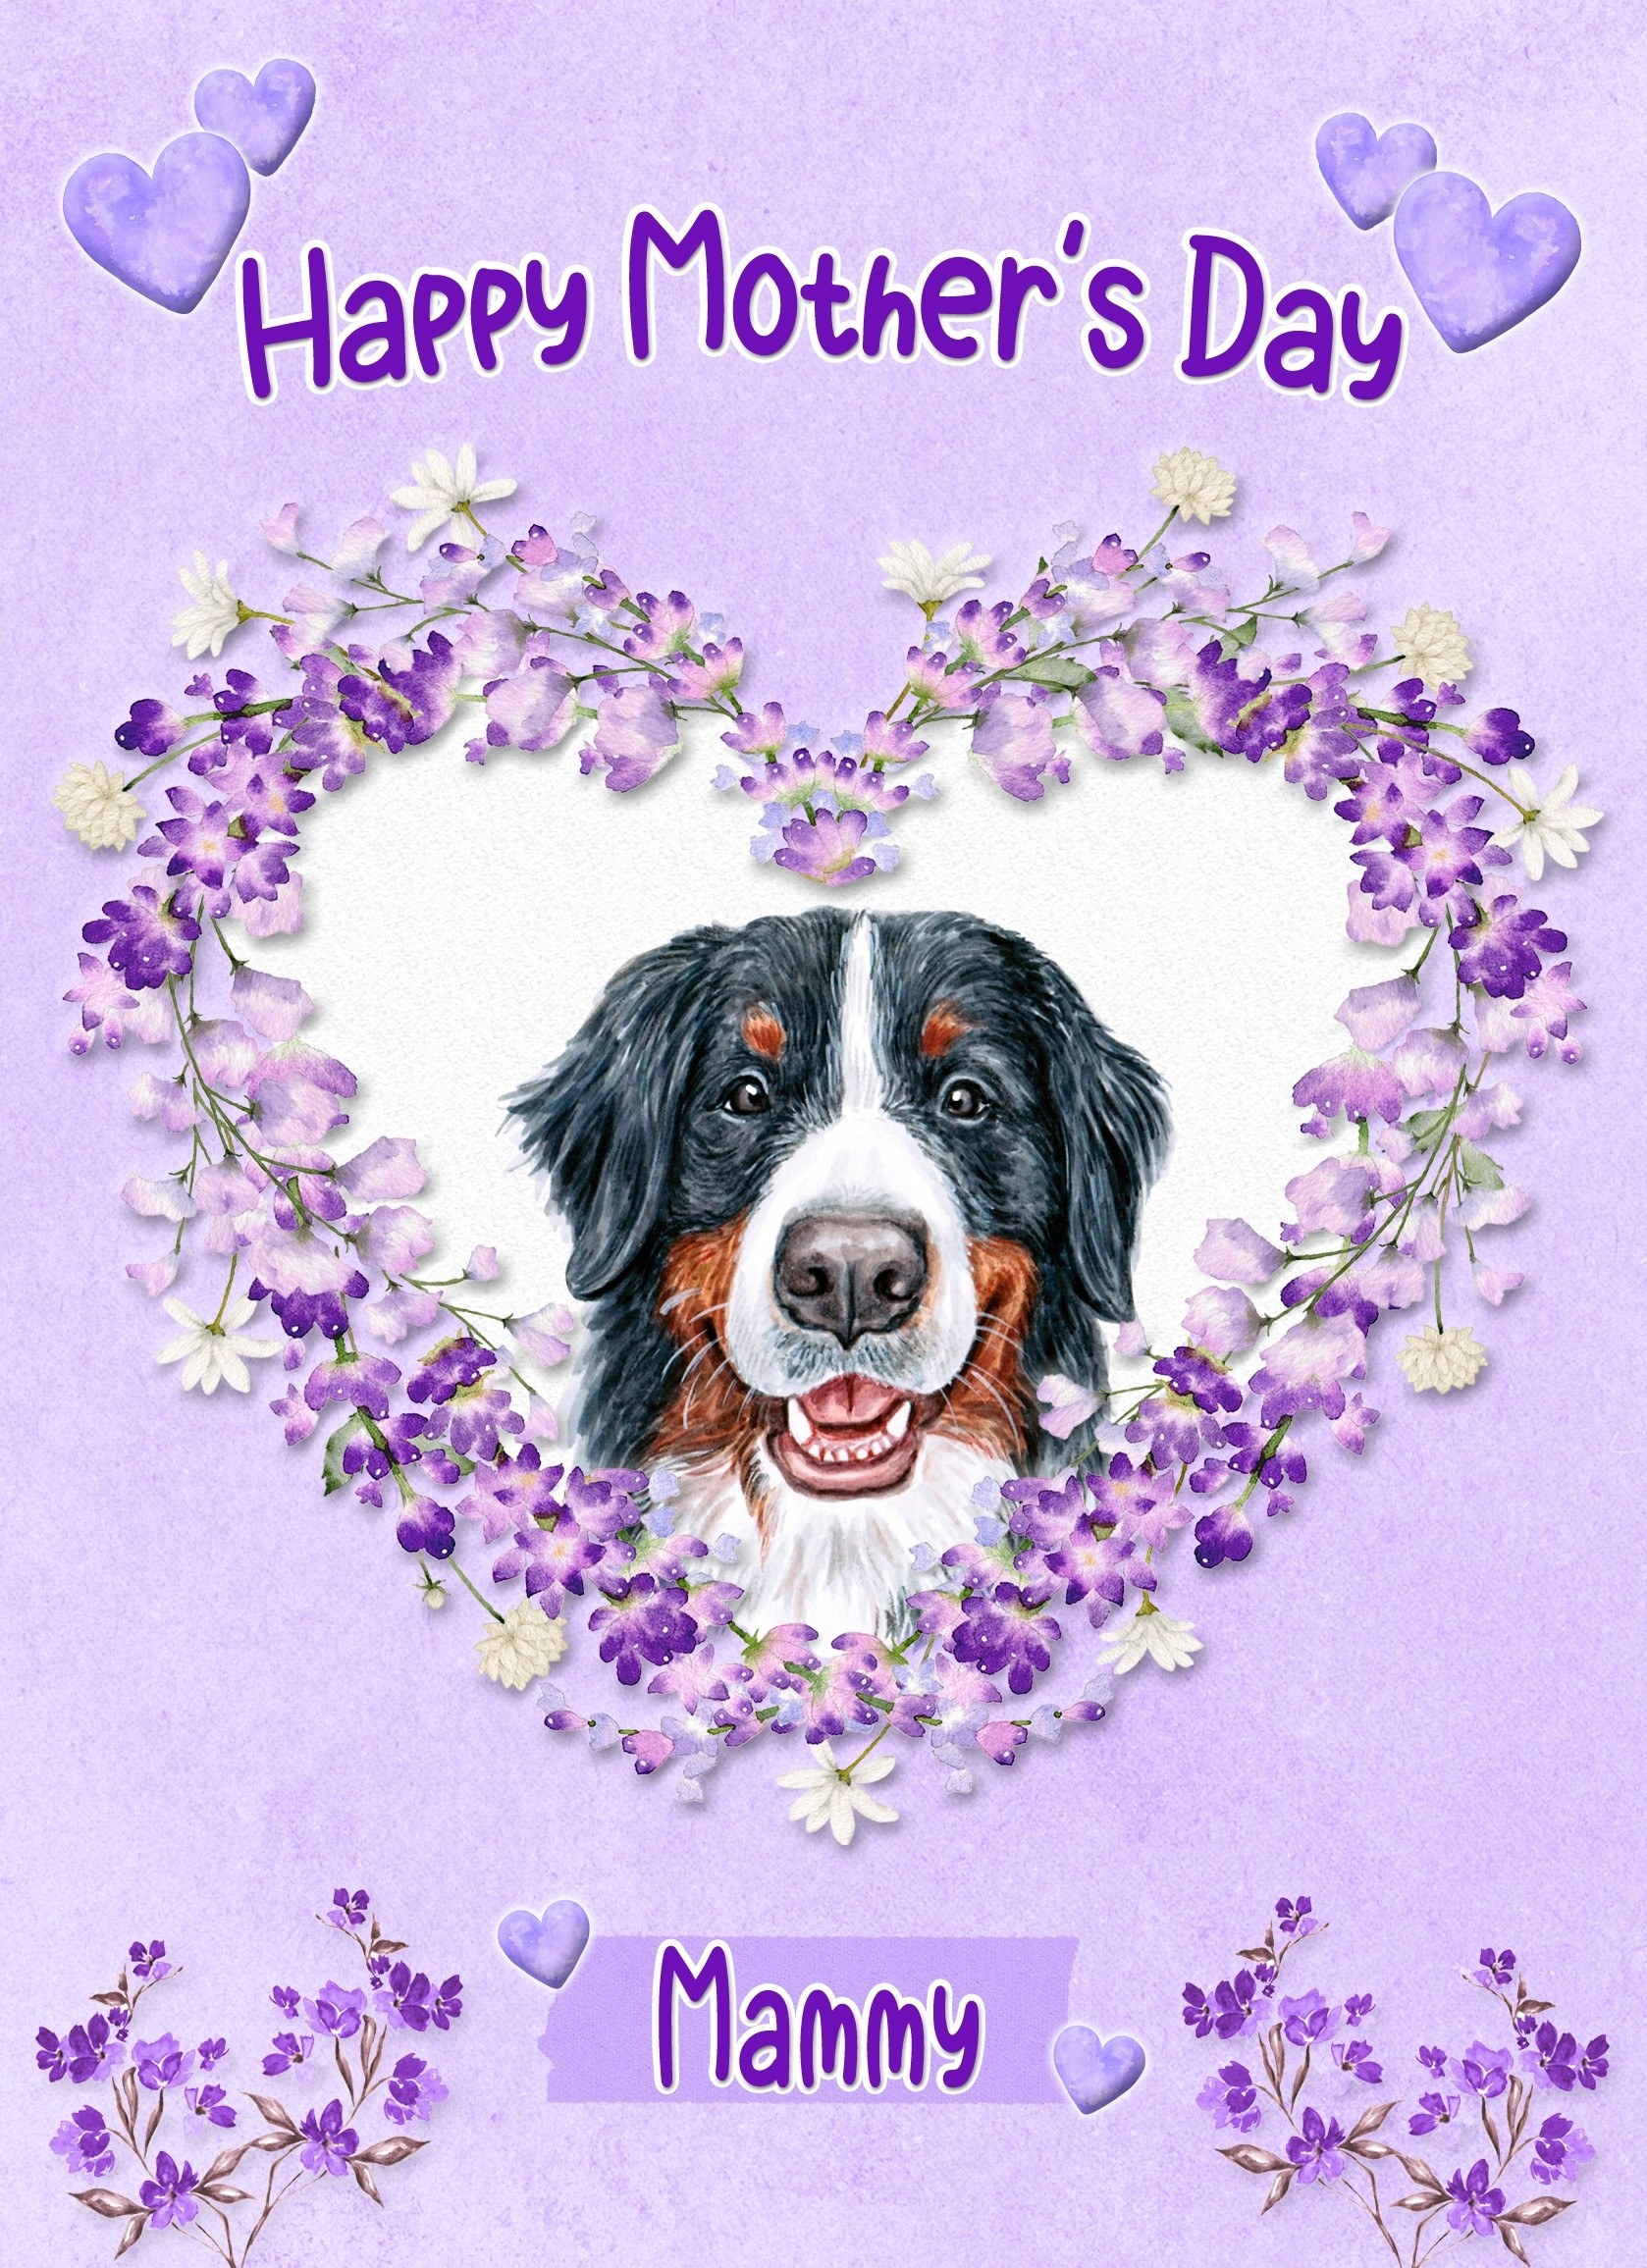 Bernese Mountain Dog Mothers Day Card (Happy Mothers, Mammy)